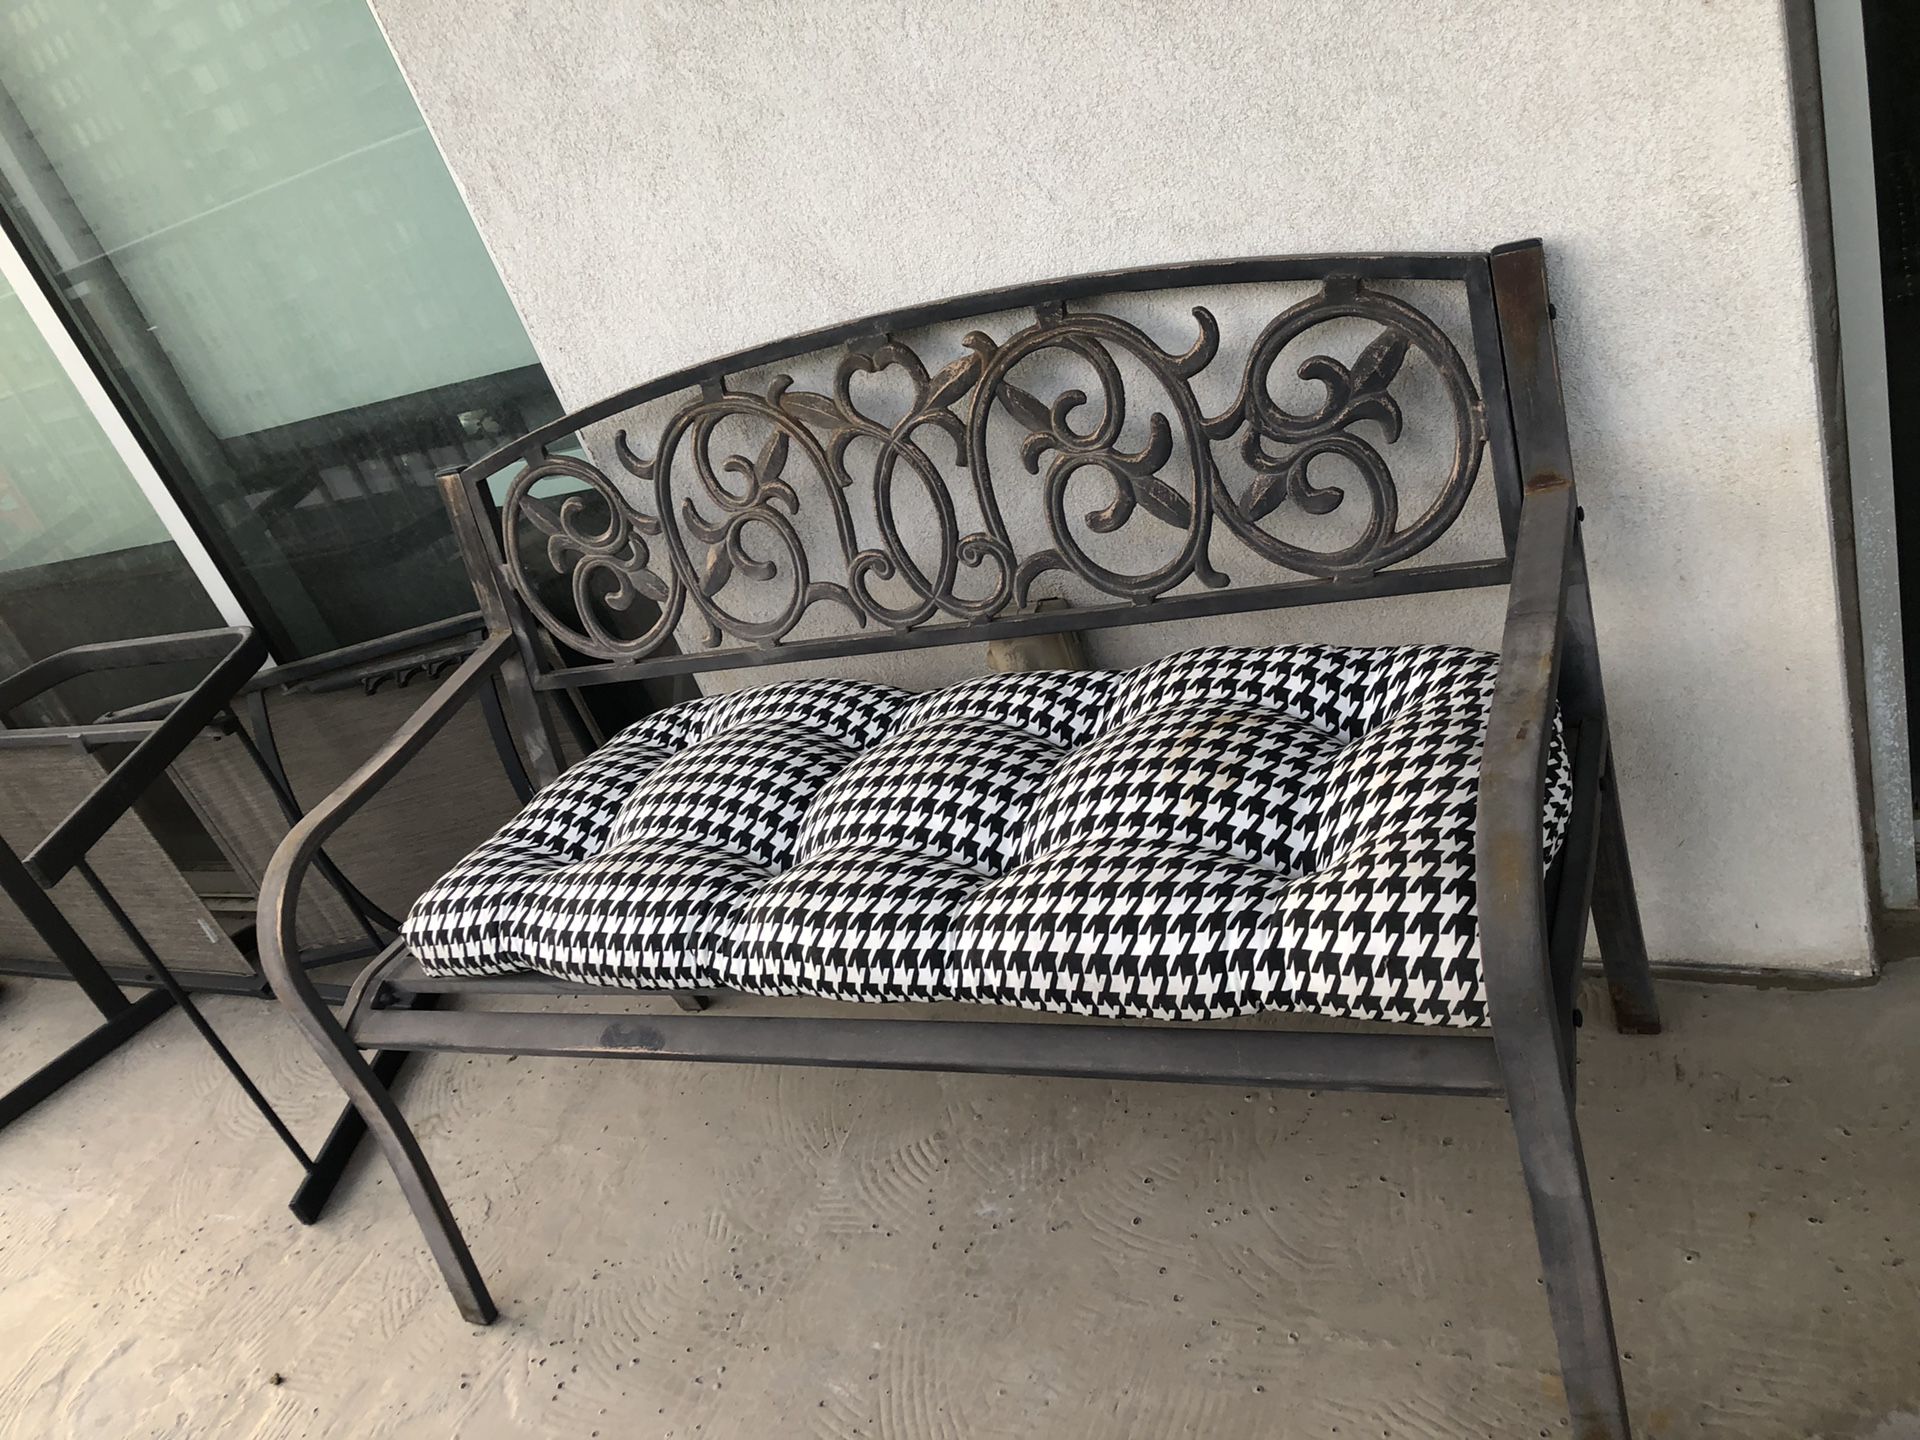 Patio furniture bench and chair with seat cushion pads